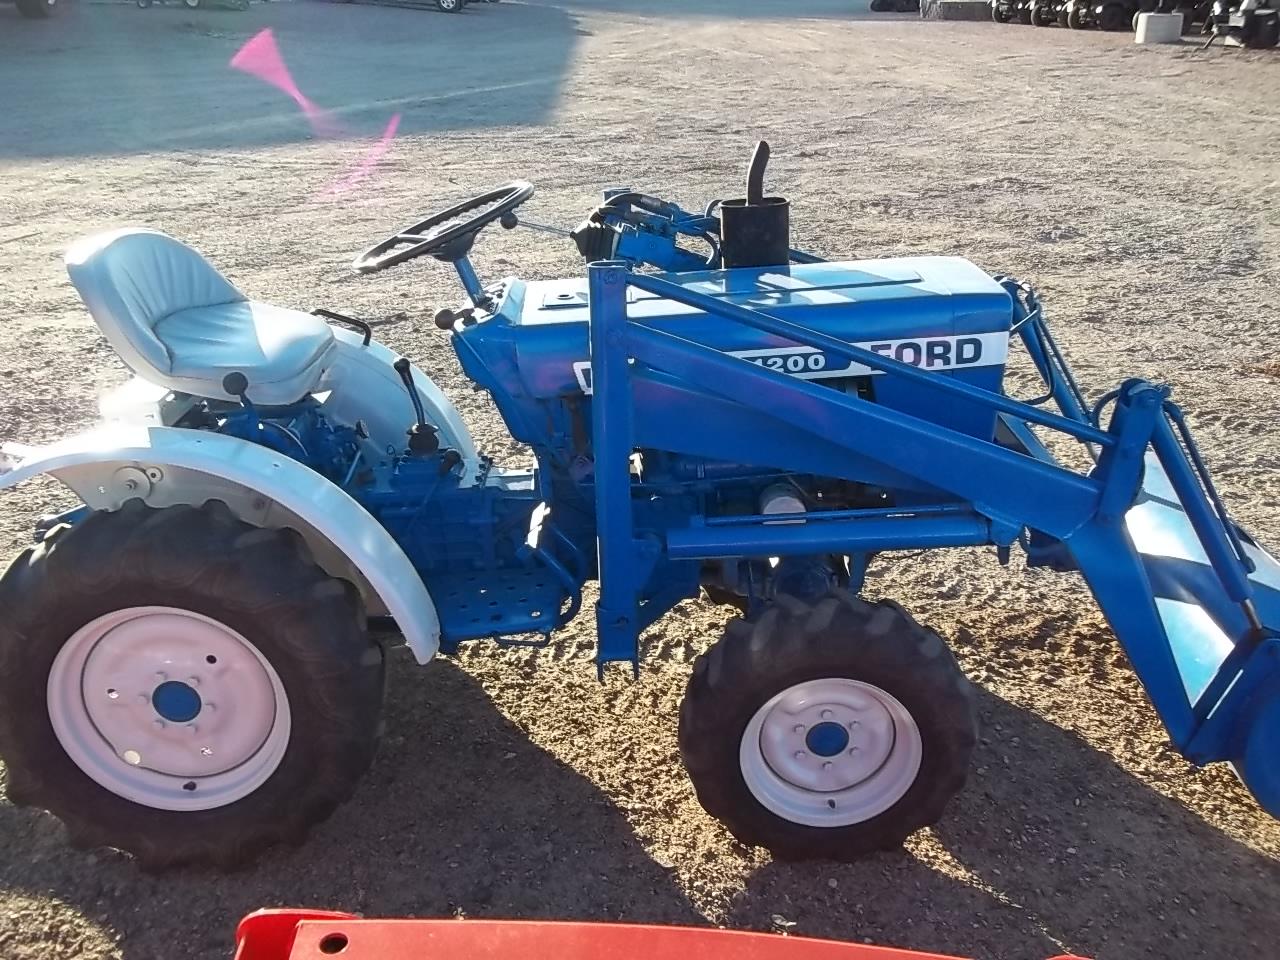 Ford+1200+Tractor+For+Sale Ford 1200 Tractor For Sale http ...